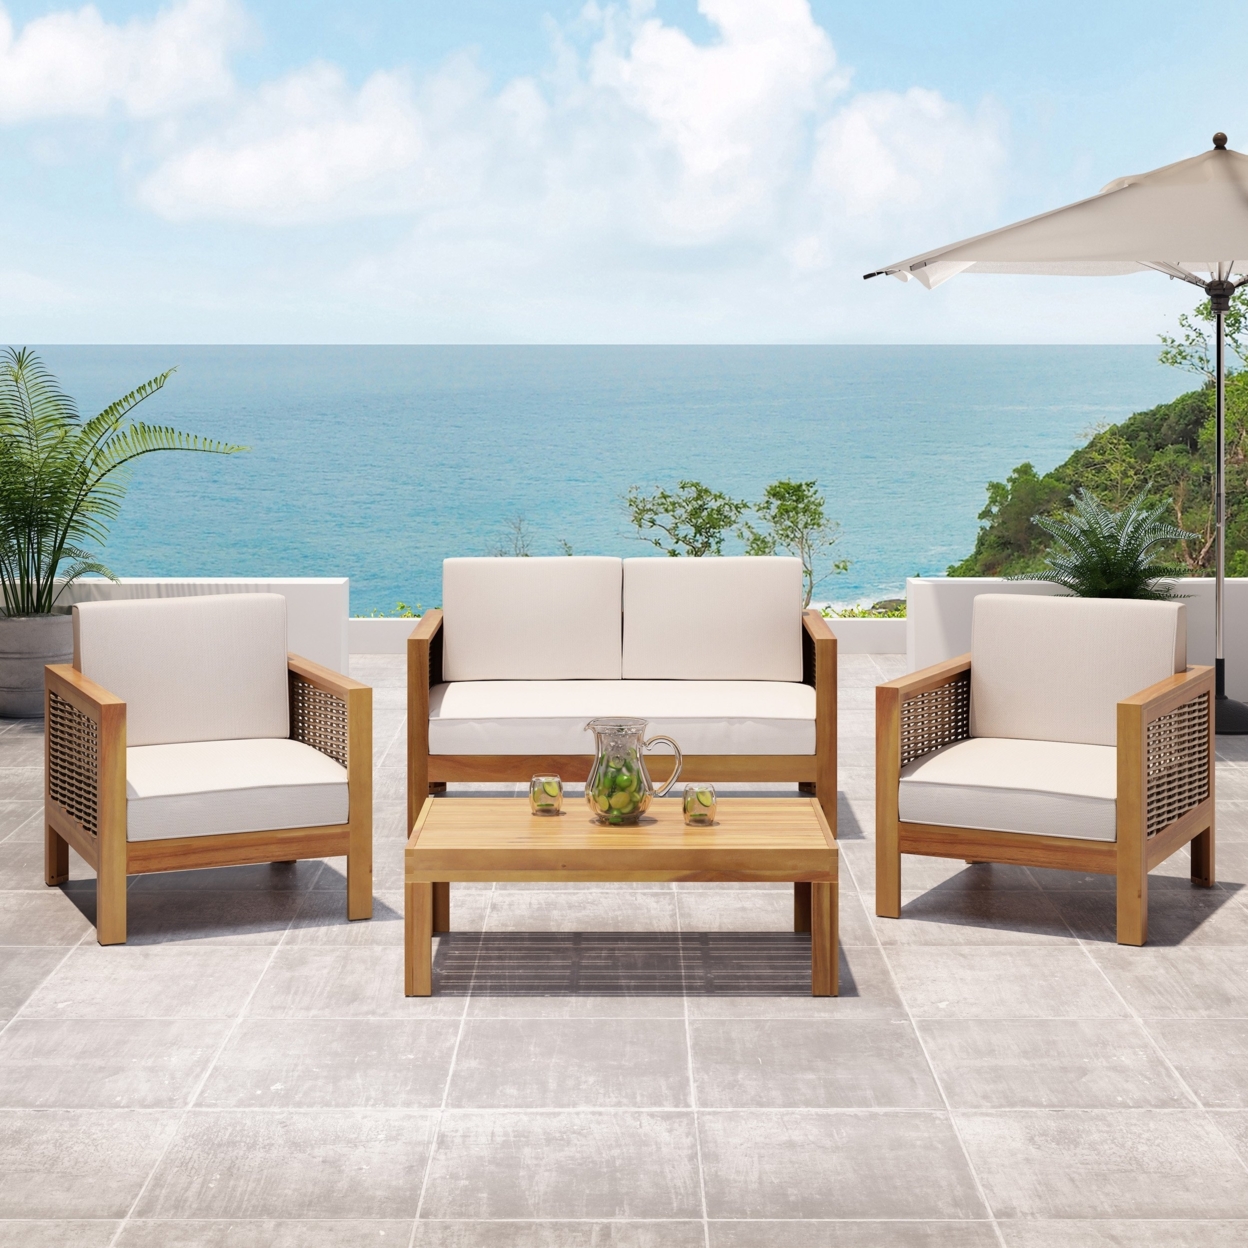 Mayes Outdoor 4 Seater Acacia Wood Chat Set With Wicker Accents - Teak/mixed Brown/beige